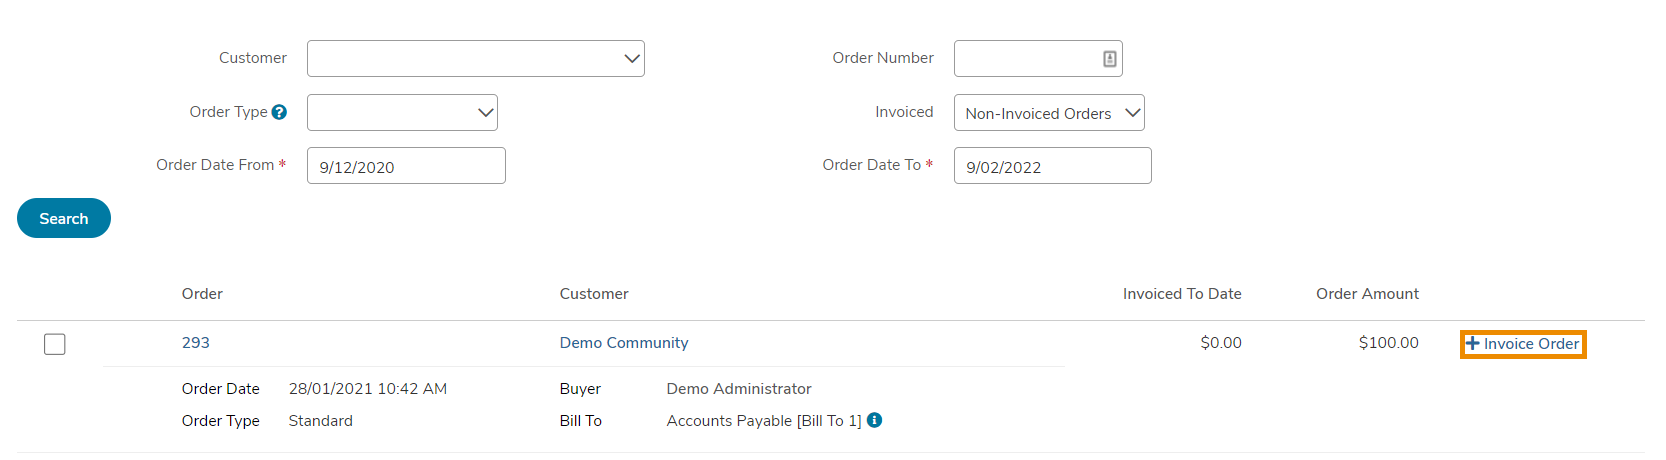 Non-Invoiced_Orders_Screenshot_2.png